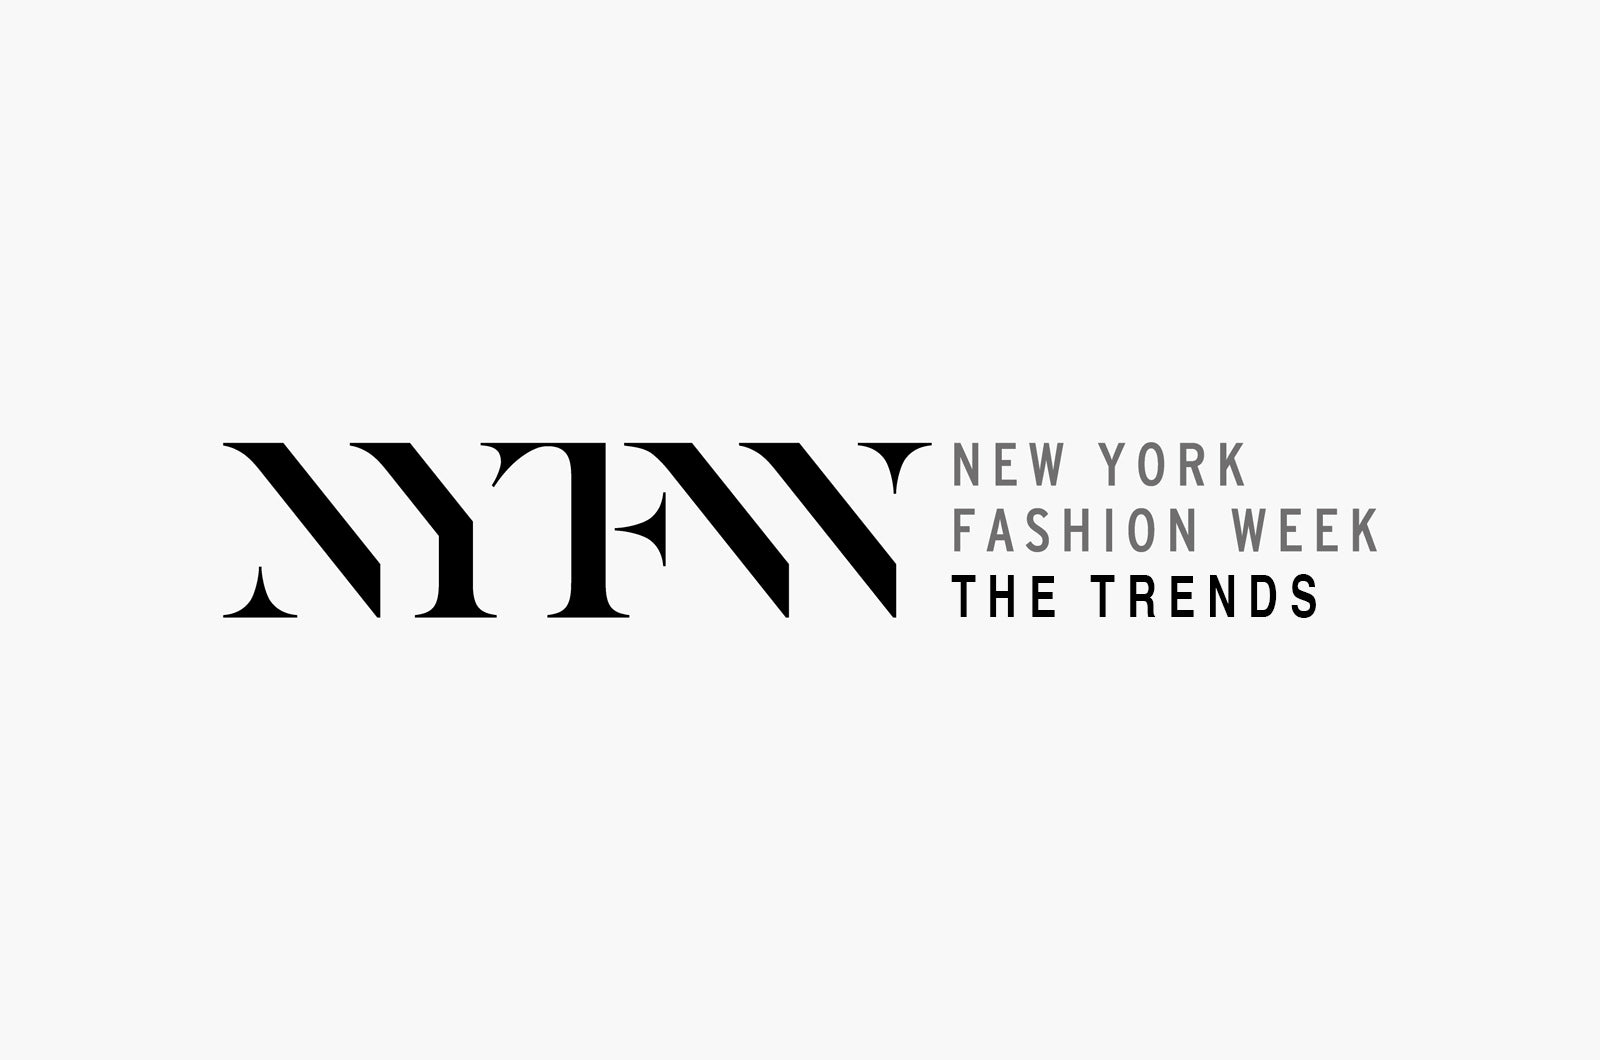 Get Ready for Spring 2020, New York Fashion Week Style